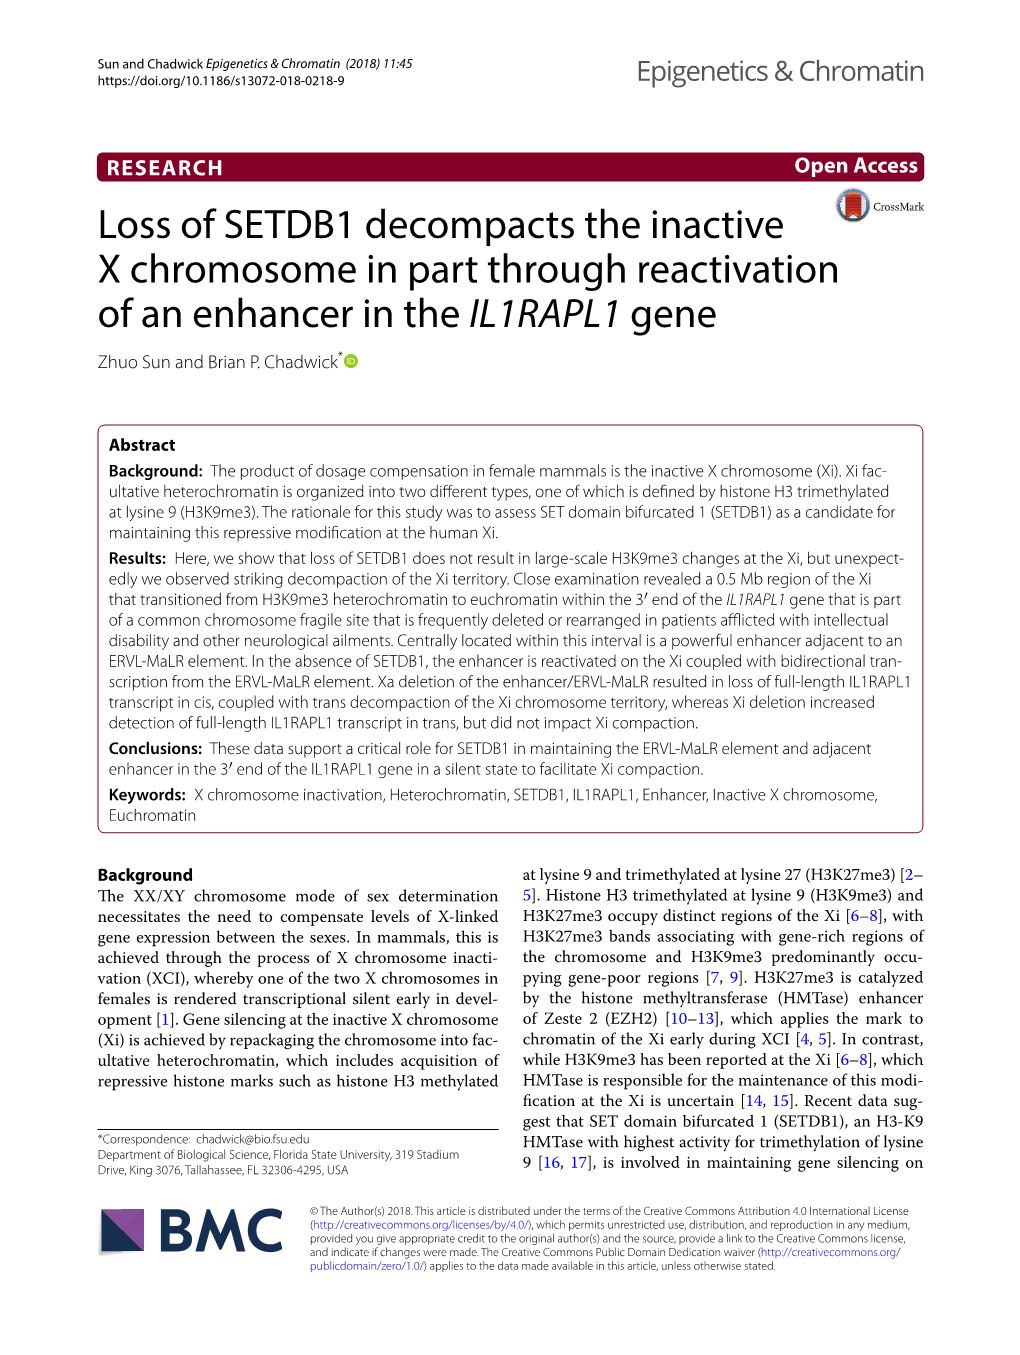 Loss of SETDB1 Decompacts the Inactive X Chromosome in Part Through Reactivation of an Enhancer in the IL1RAPL1 Gene Zhuo Sun and Brian P